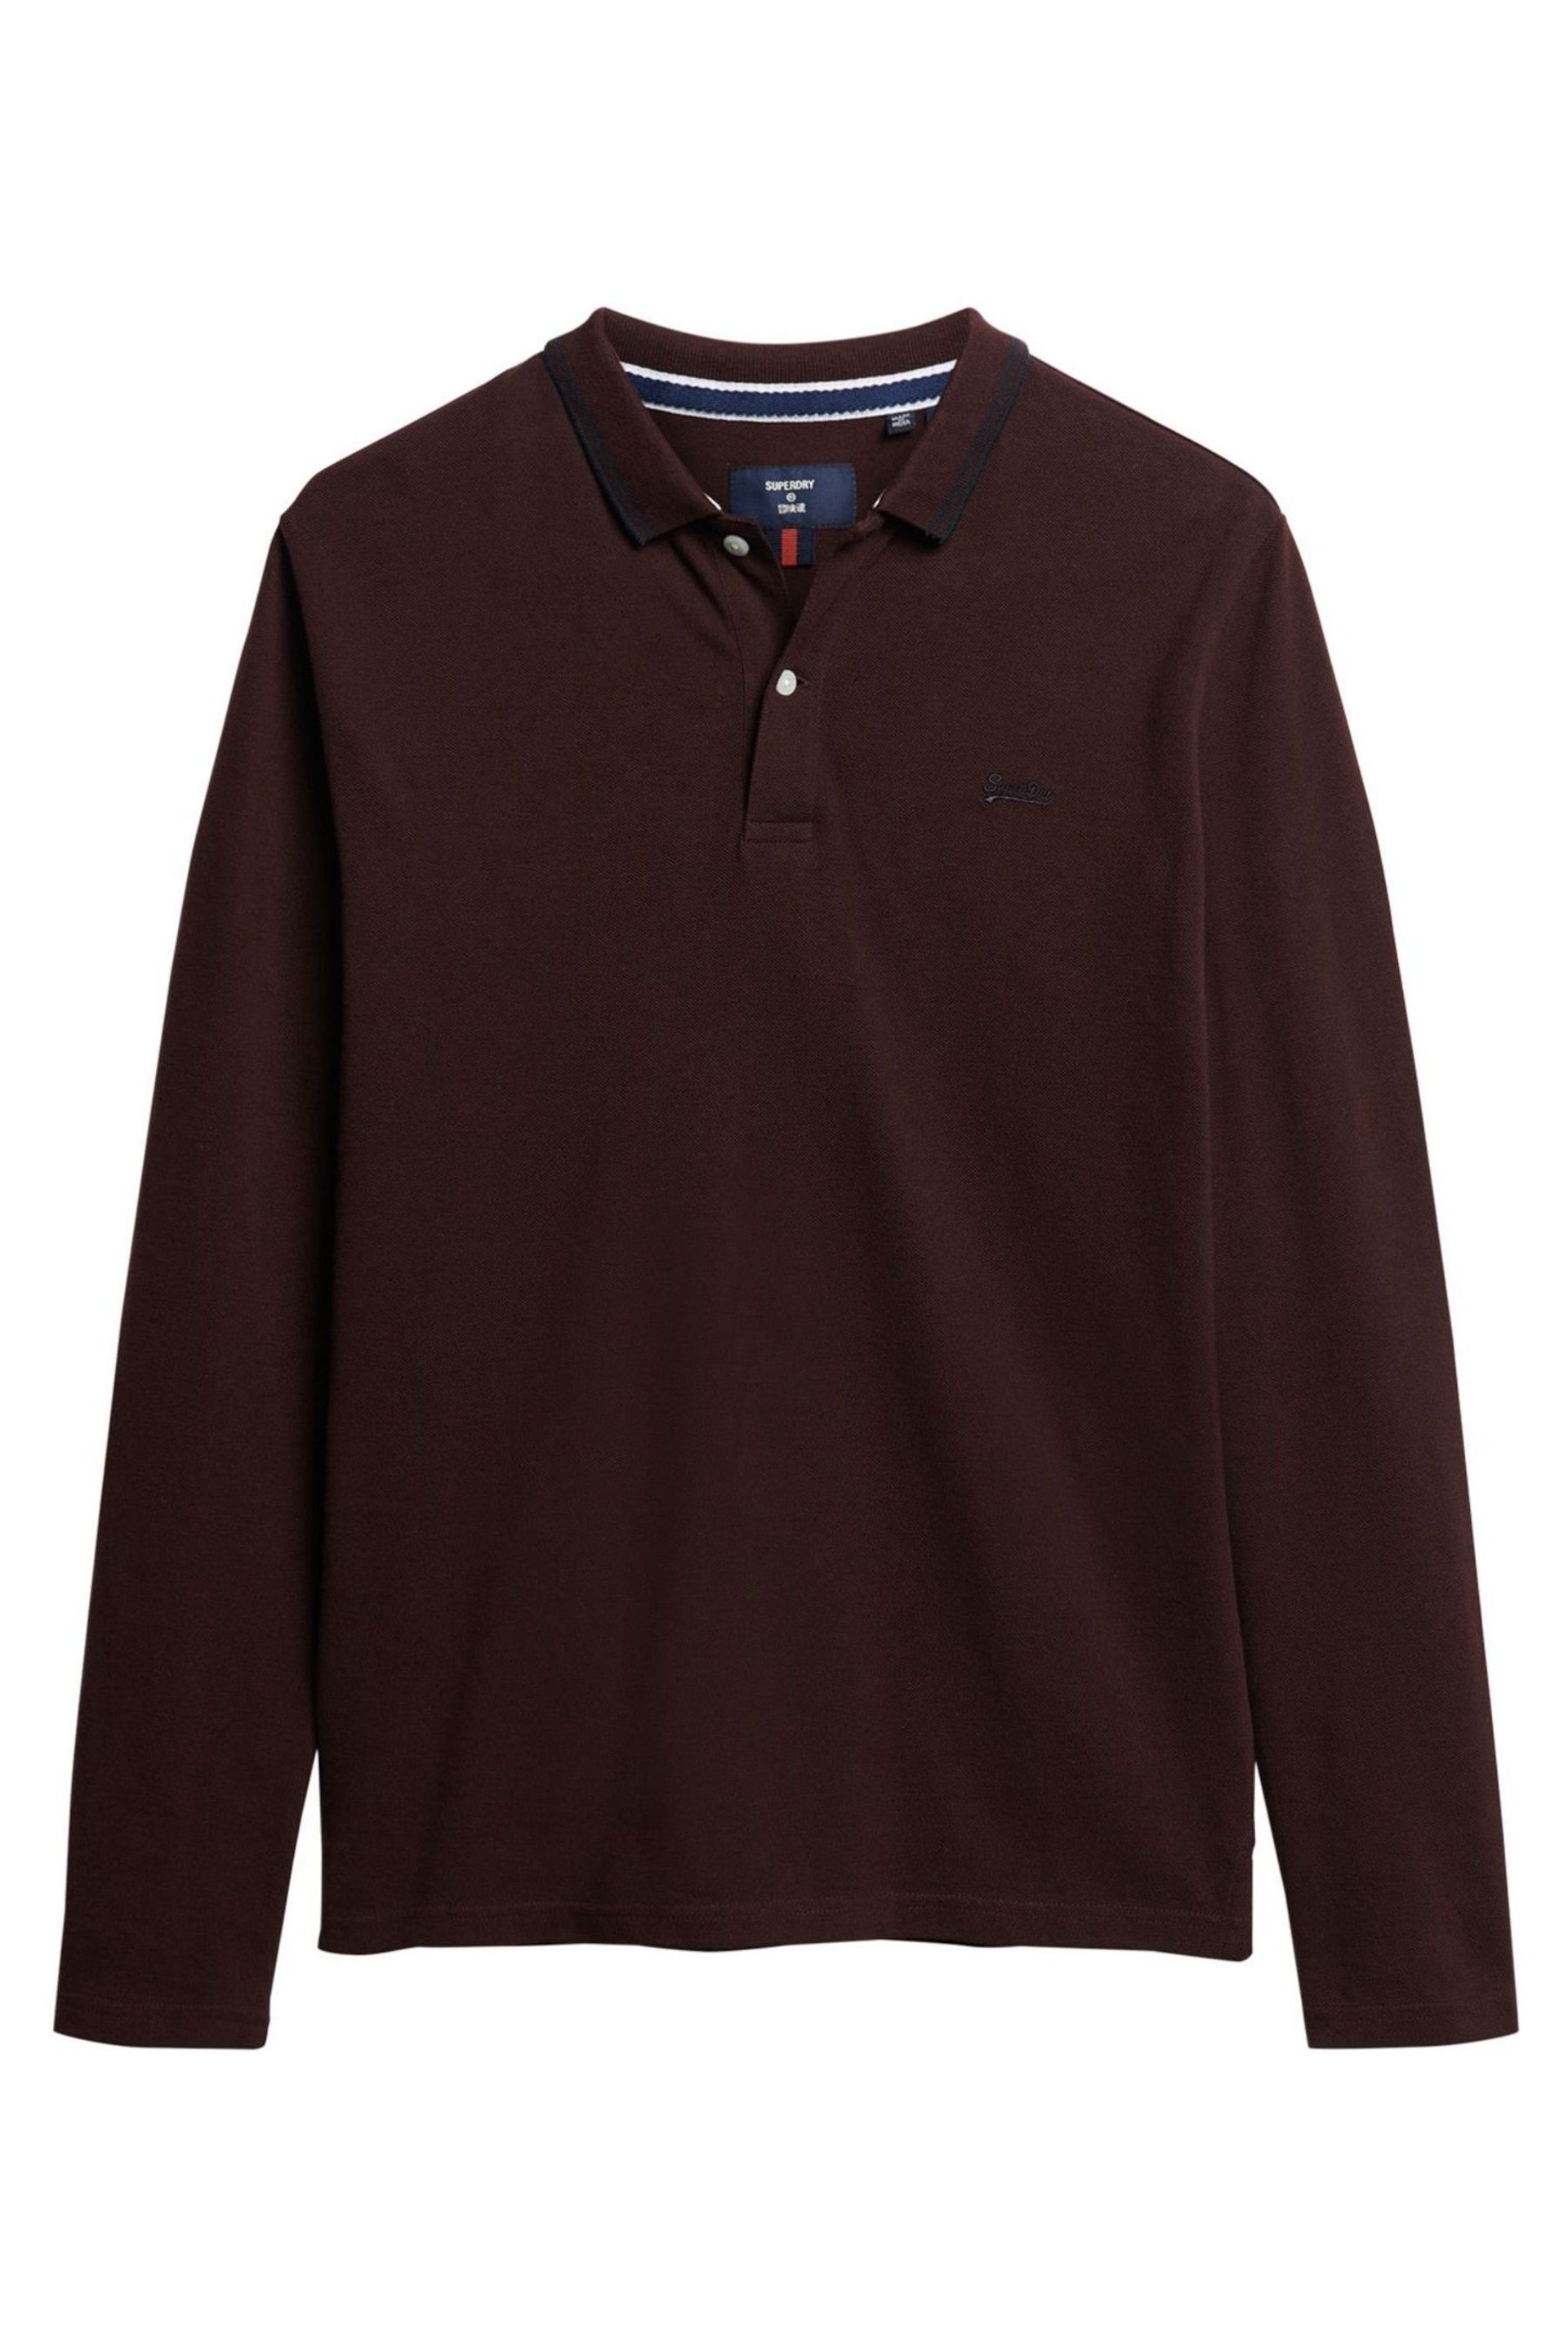 Superdry Burgundy Red Tipped Long Sleeve Polo Shirt - Image 5 of 7